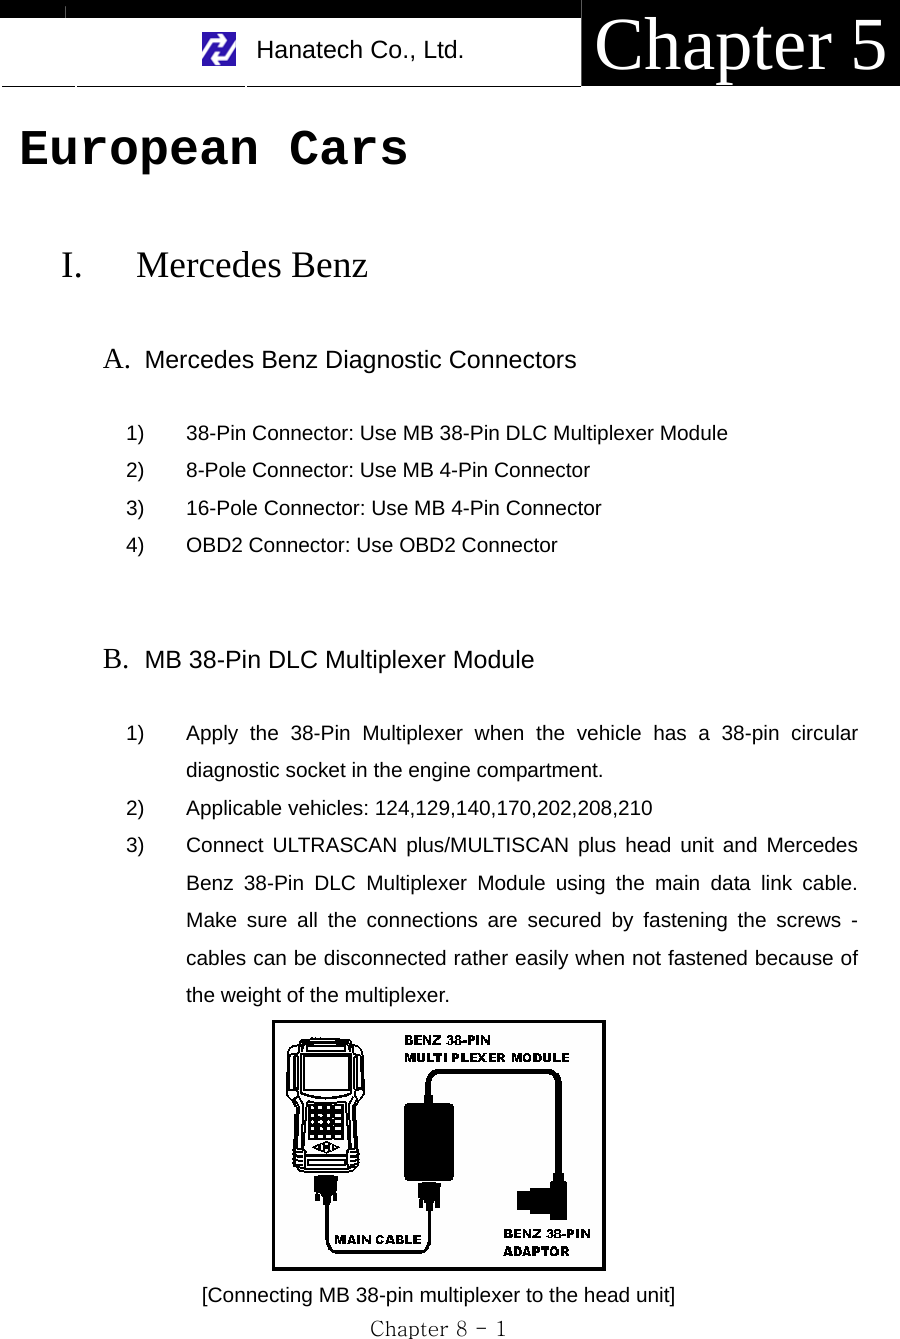     Hanatech Co., Ltd.  Chapter 5 Chapter 8 - 1 European Cars  I. Mercedes Benz  A. Mercedes Benz Diagnostic Connectors    1)  38-Pin Connector: Use MB 38-Pin DLC Multiplexer Module 2)  8-Pole Connector: Use MB 4-Pin Connector 3)  16-Pole Connector: Use MB 4-Pin Connector 4)  OBD2 Connector: Use OBD2 Connector   B. MB 38-Pin DLC Multiplexer Module  1)  Apply the 38-Pin Multiplexer when the vehicle has a 38-pin circular diagnostic socket in the engine compartment. 2)  Applicable vehicles: 124,129,140,170,202,208,210 3)  Connect ULTRASCAN plus/MULTISCAN plus head unit and Mercedes Benz 38-Pin DLC Multiplexer Module using the main data link cable. Make sure all the connections are secured by fastening the screws - cables can be disconnected rather easily when not fastened because of the weight of the multiplexer.  [Connecting MB 38-pin multiplexer to the head unit] 